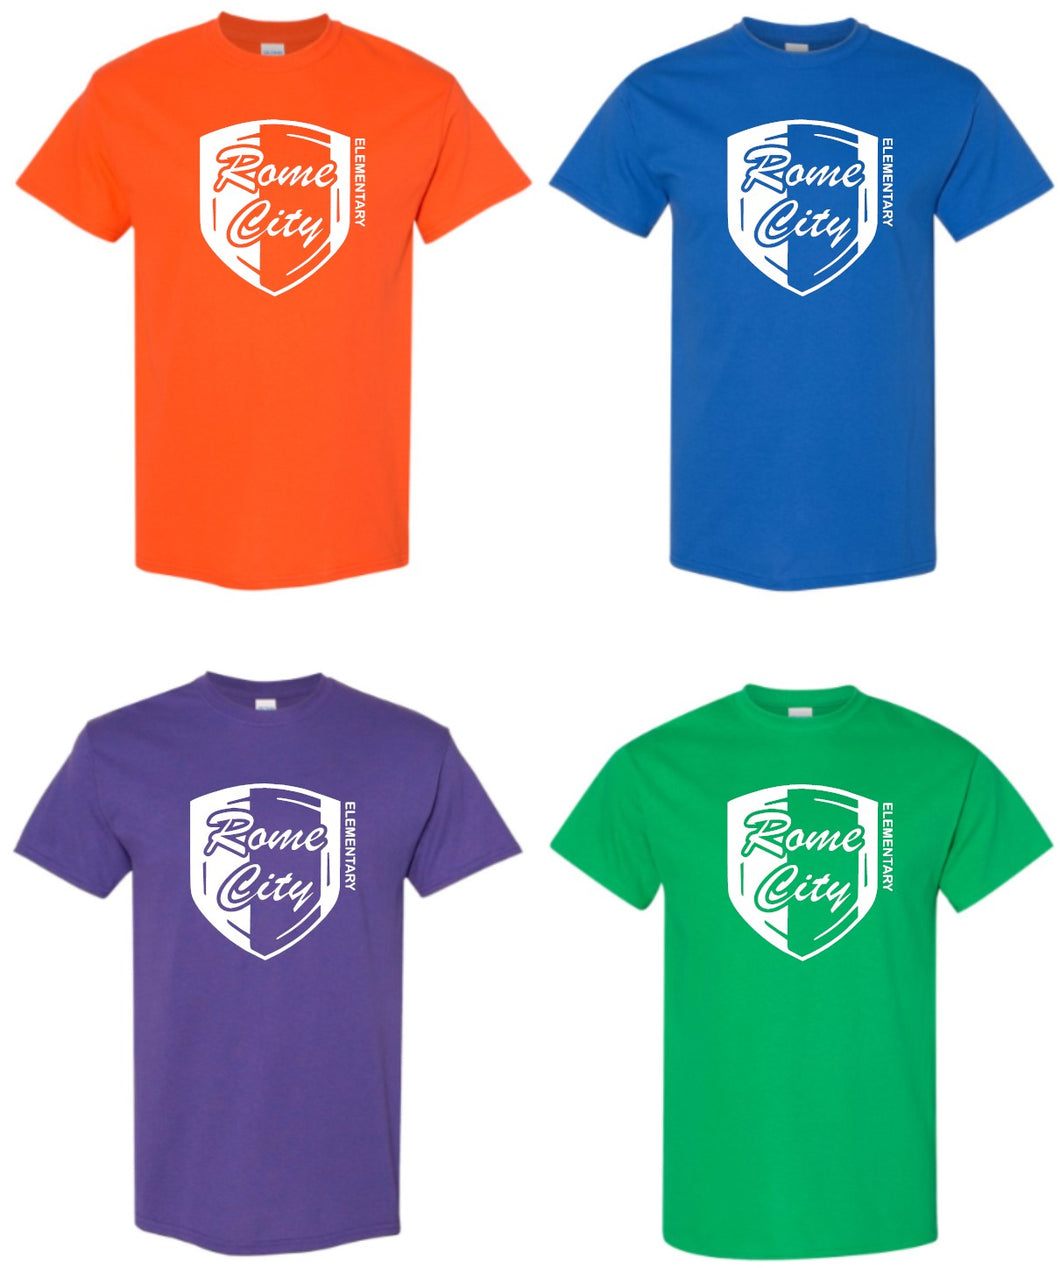 RC T-Shirt or Long Sleeve - Color Shirt With White Print